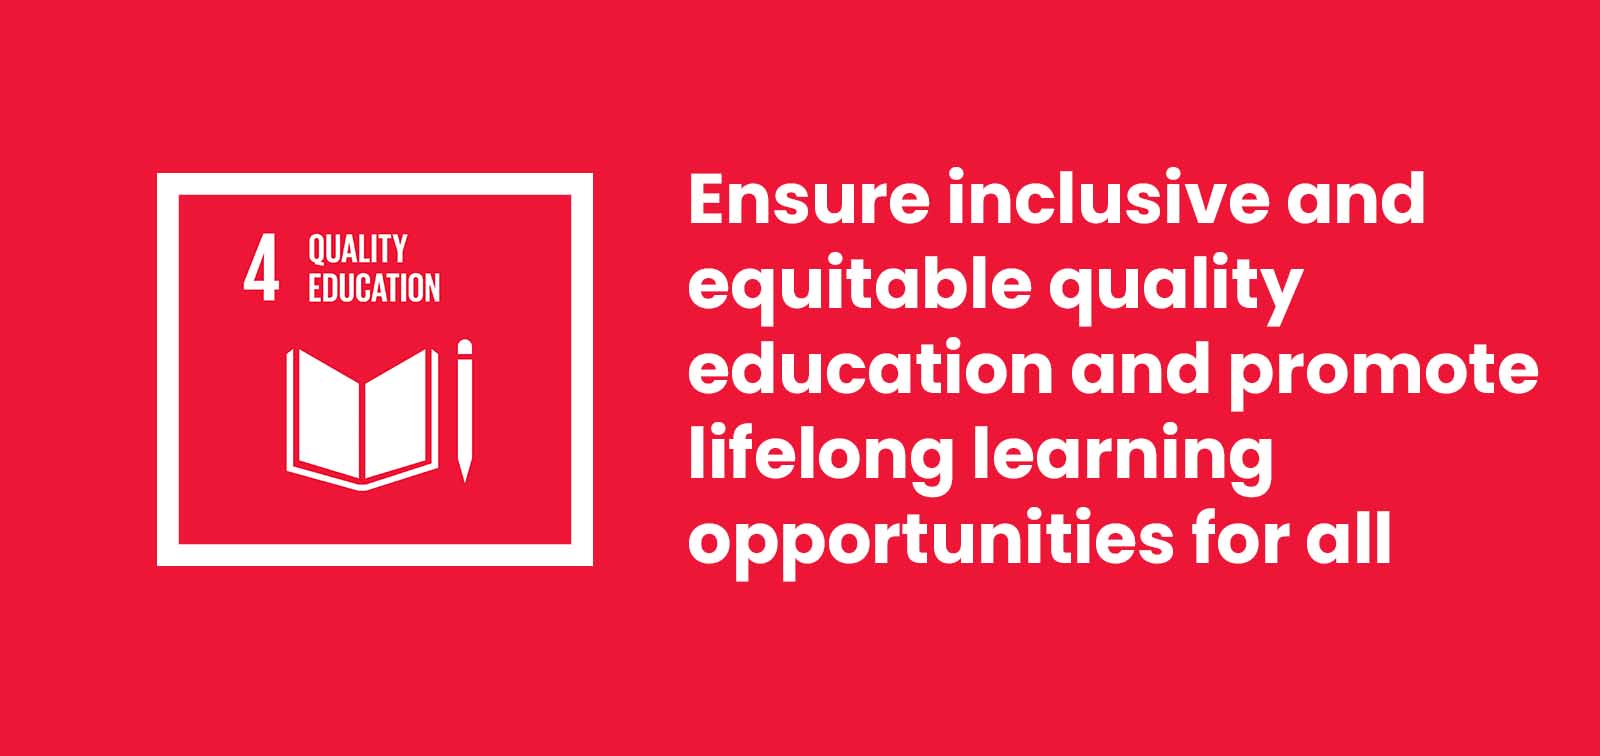 What does Quality Education mean? Breaking down SDG #4